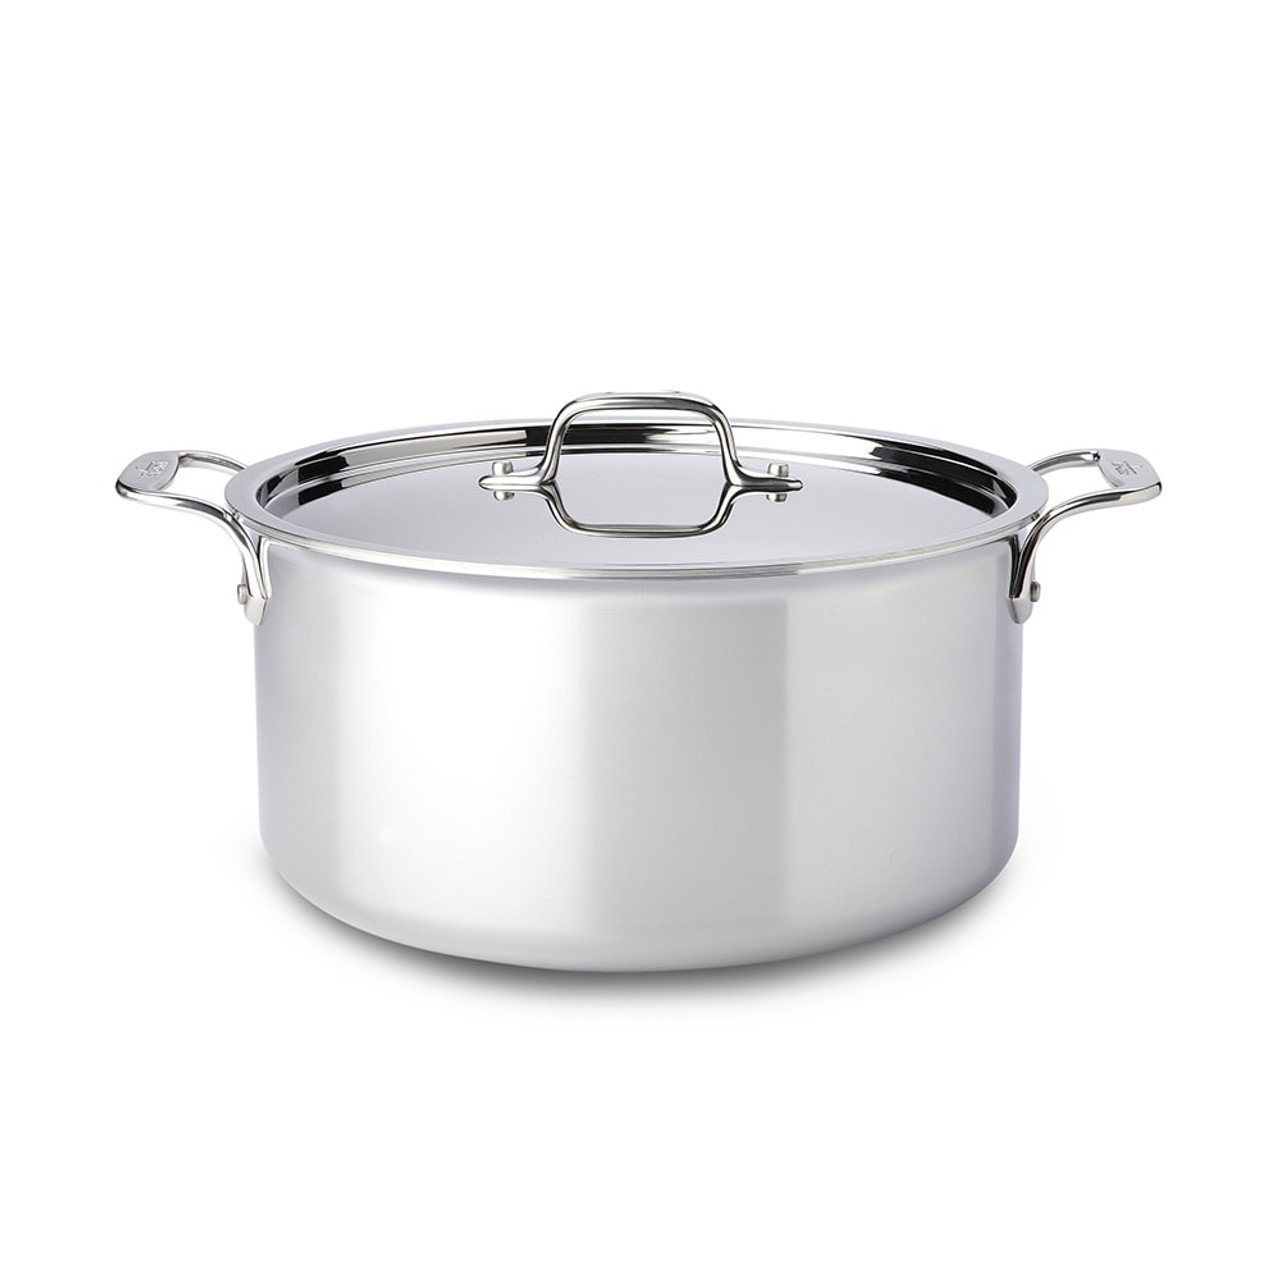 https://cdn11.bigcommerce.com/s-hccytny0od/images/stencil/1280x1280/products/484/8441/all-clad-stainless-steel-stock-pot-8qt__15593.1598234950.jpg?c=2?imbypass=on